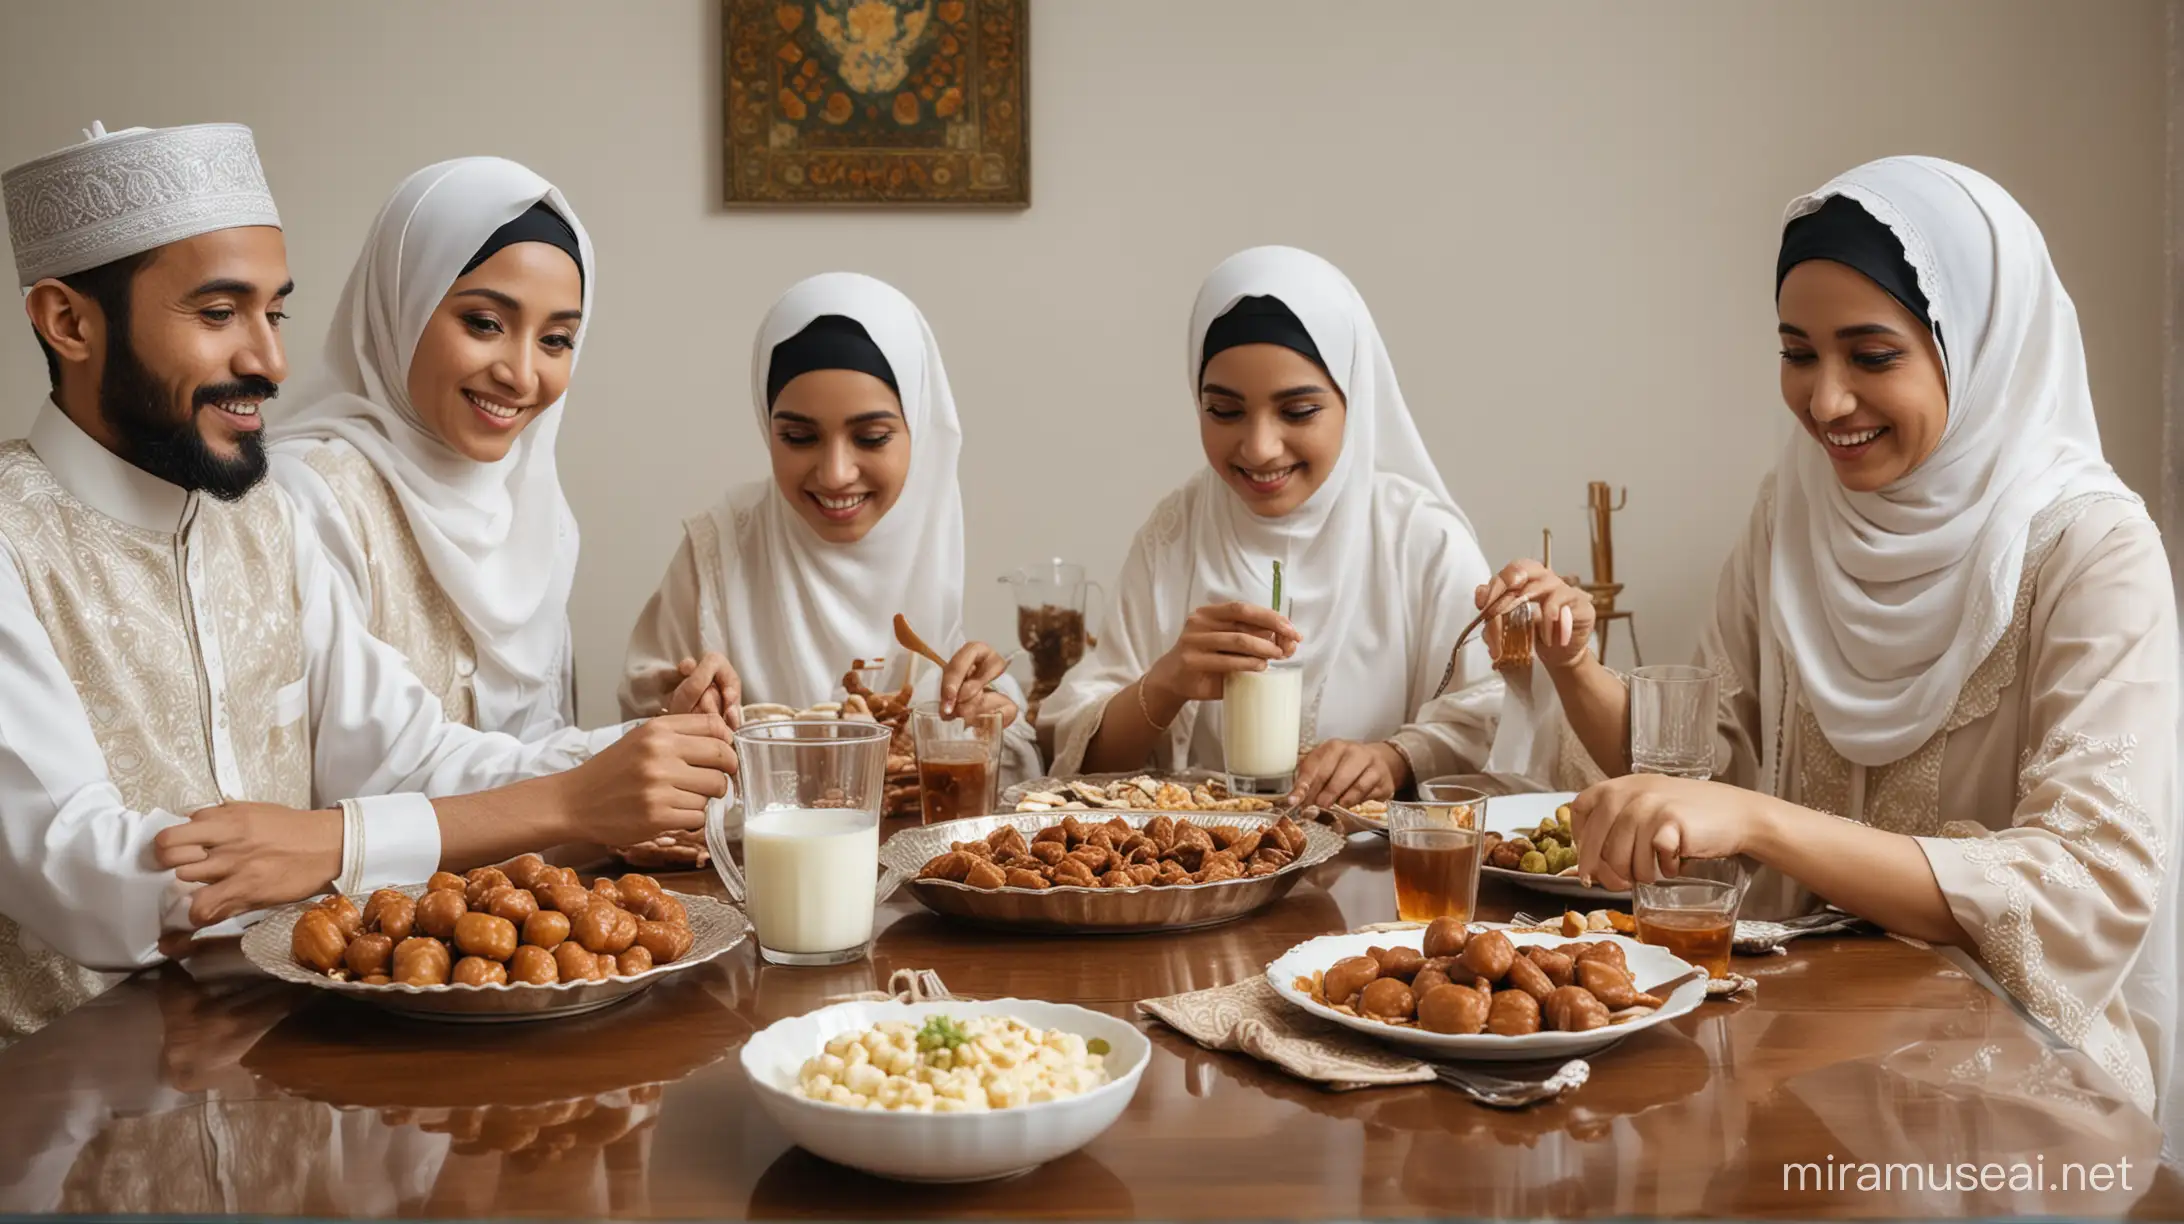 a raw photo of muslim family celebrating hari raya while drinking milk with traditional muslim appertizer dates on table, Sigma 24mm, wide angle, long shot